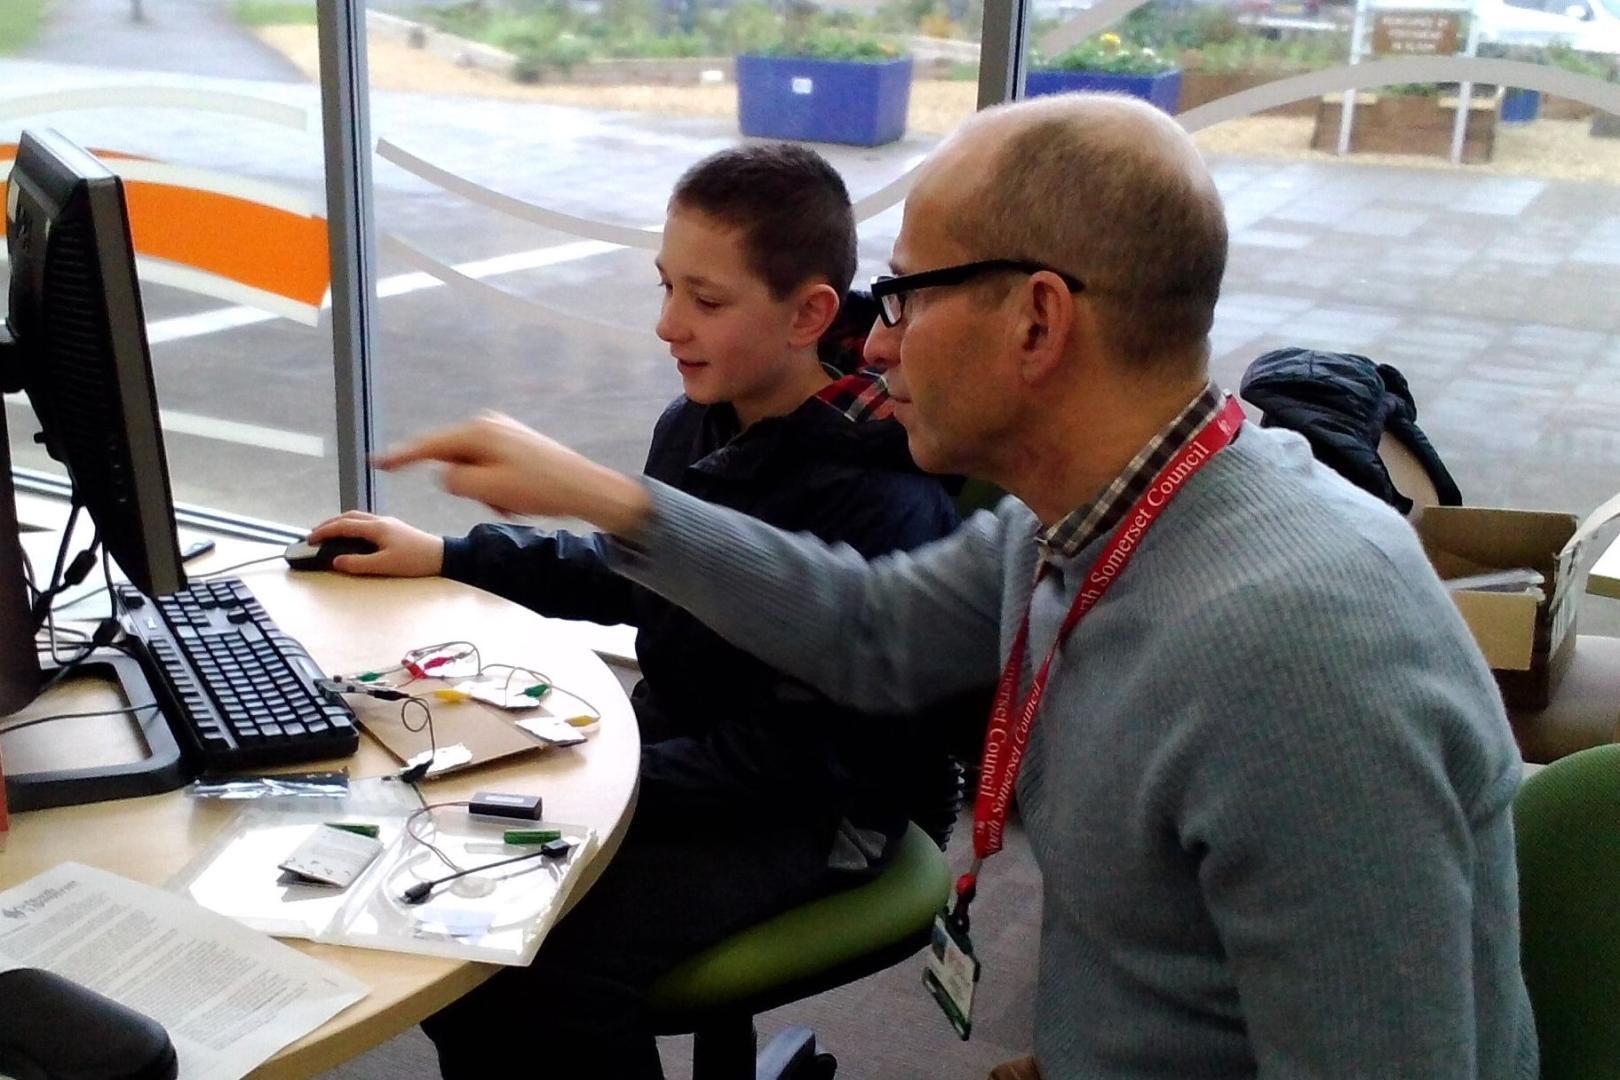 Learn to Code workshop at Portishead Library